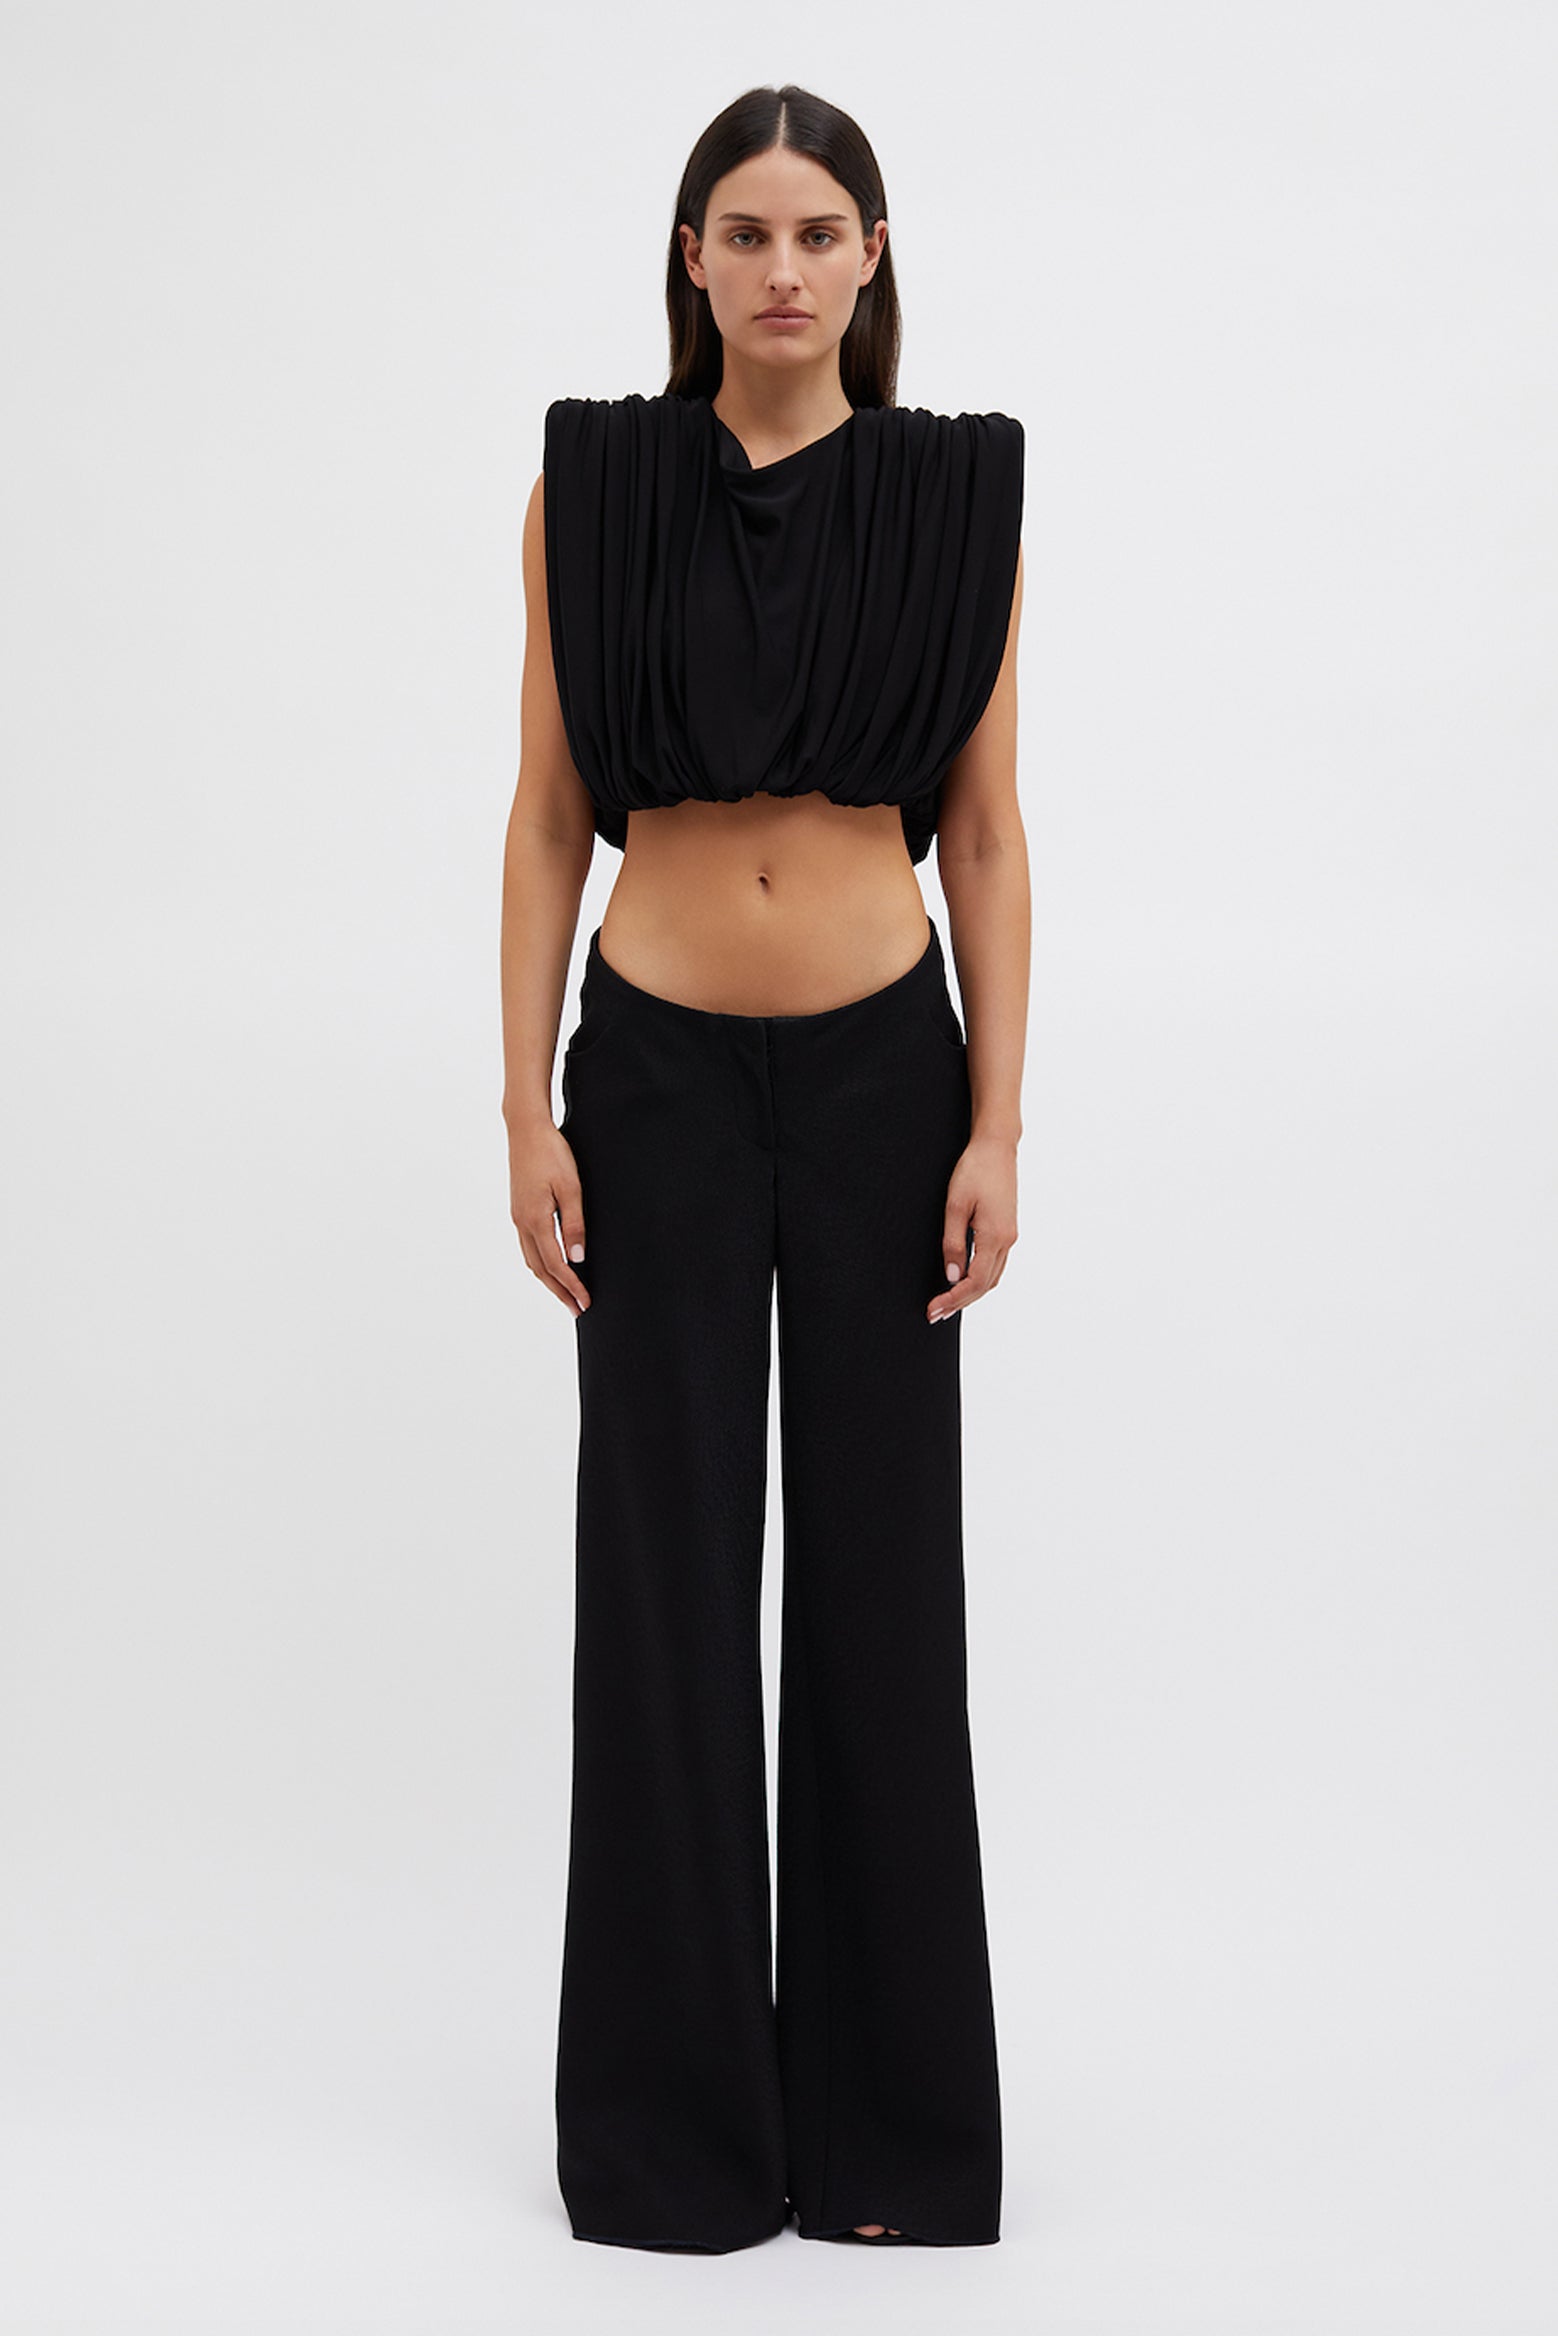 Christopher Esber Monstera Top in Black available at The New Trend Australia. 